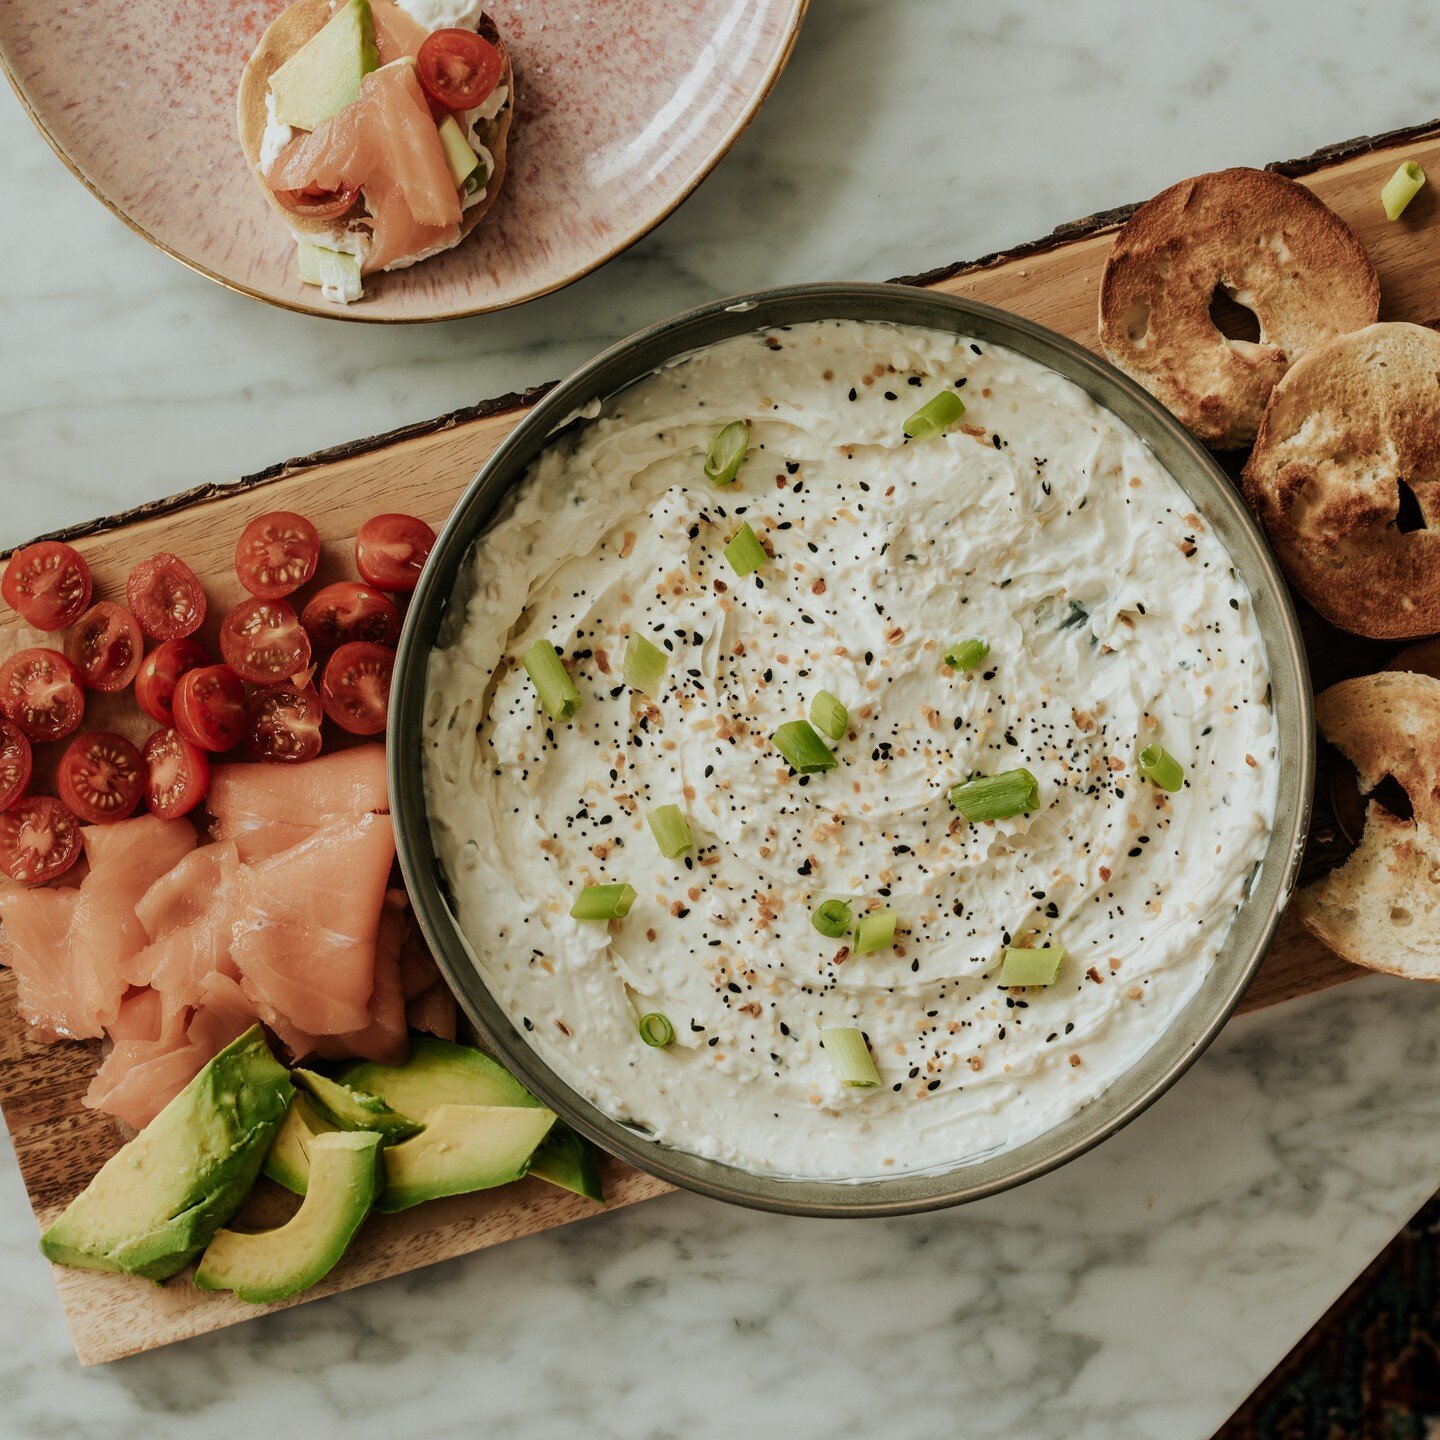 Confession: I am a lazy cook. My favorite recipes are the easy ones that look impressive.

Enter, everything bagel dip. I got this recipe from the New York Times, and it was quick &amp; easy to put together, but still looks like you put in a bit of e